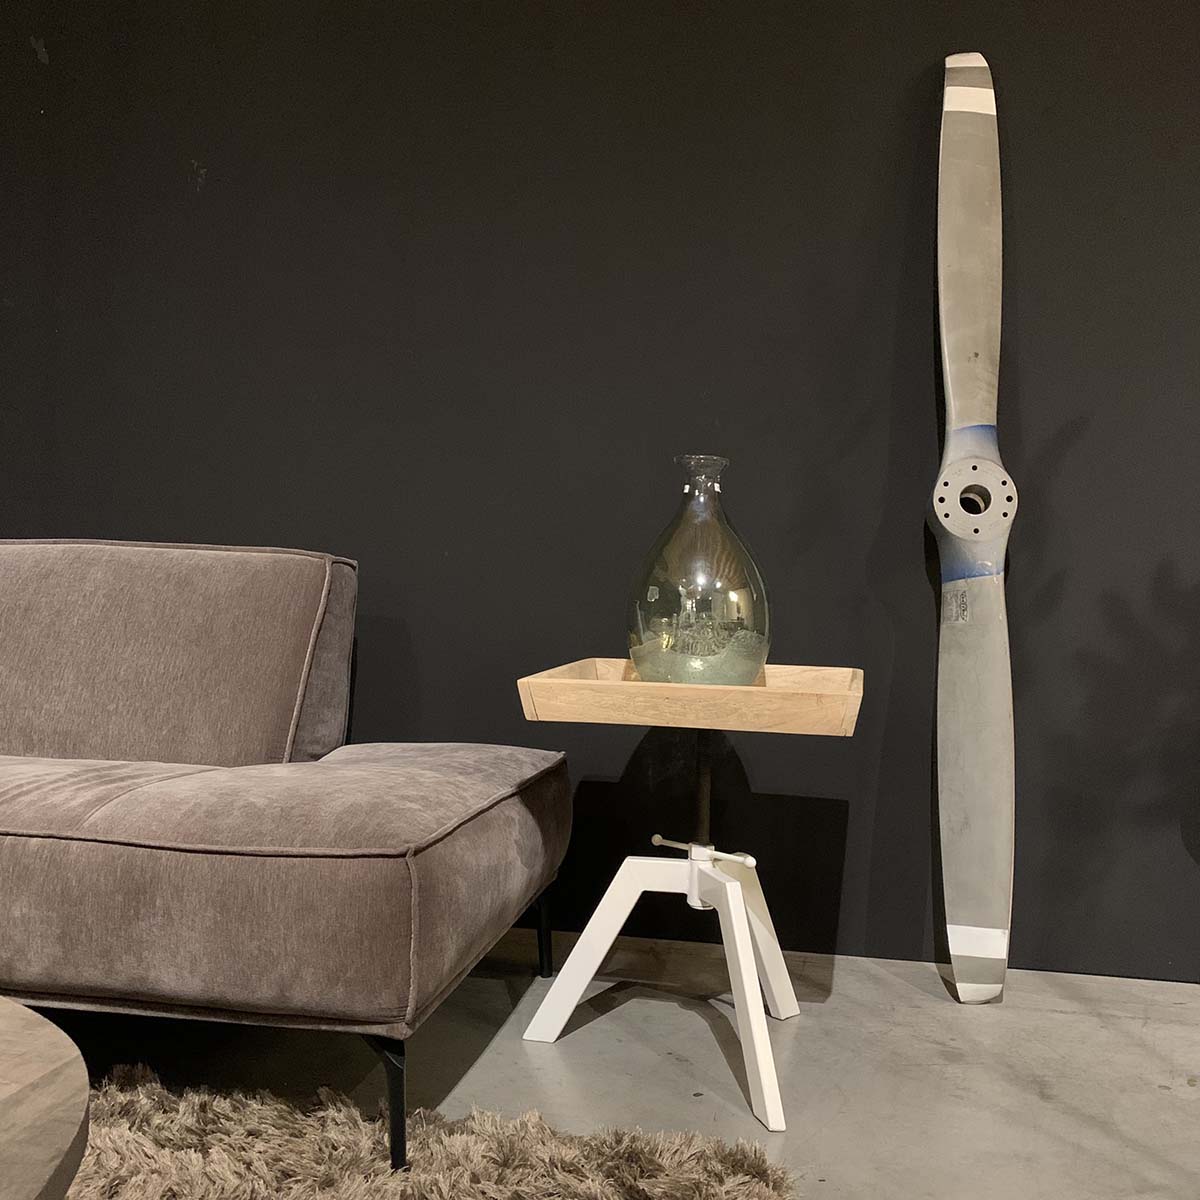 Two-bladed Sensenich propeller standing in a living room.